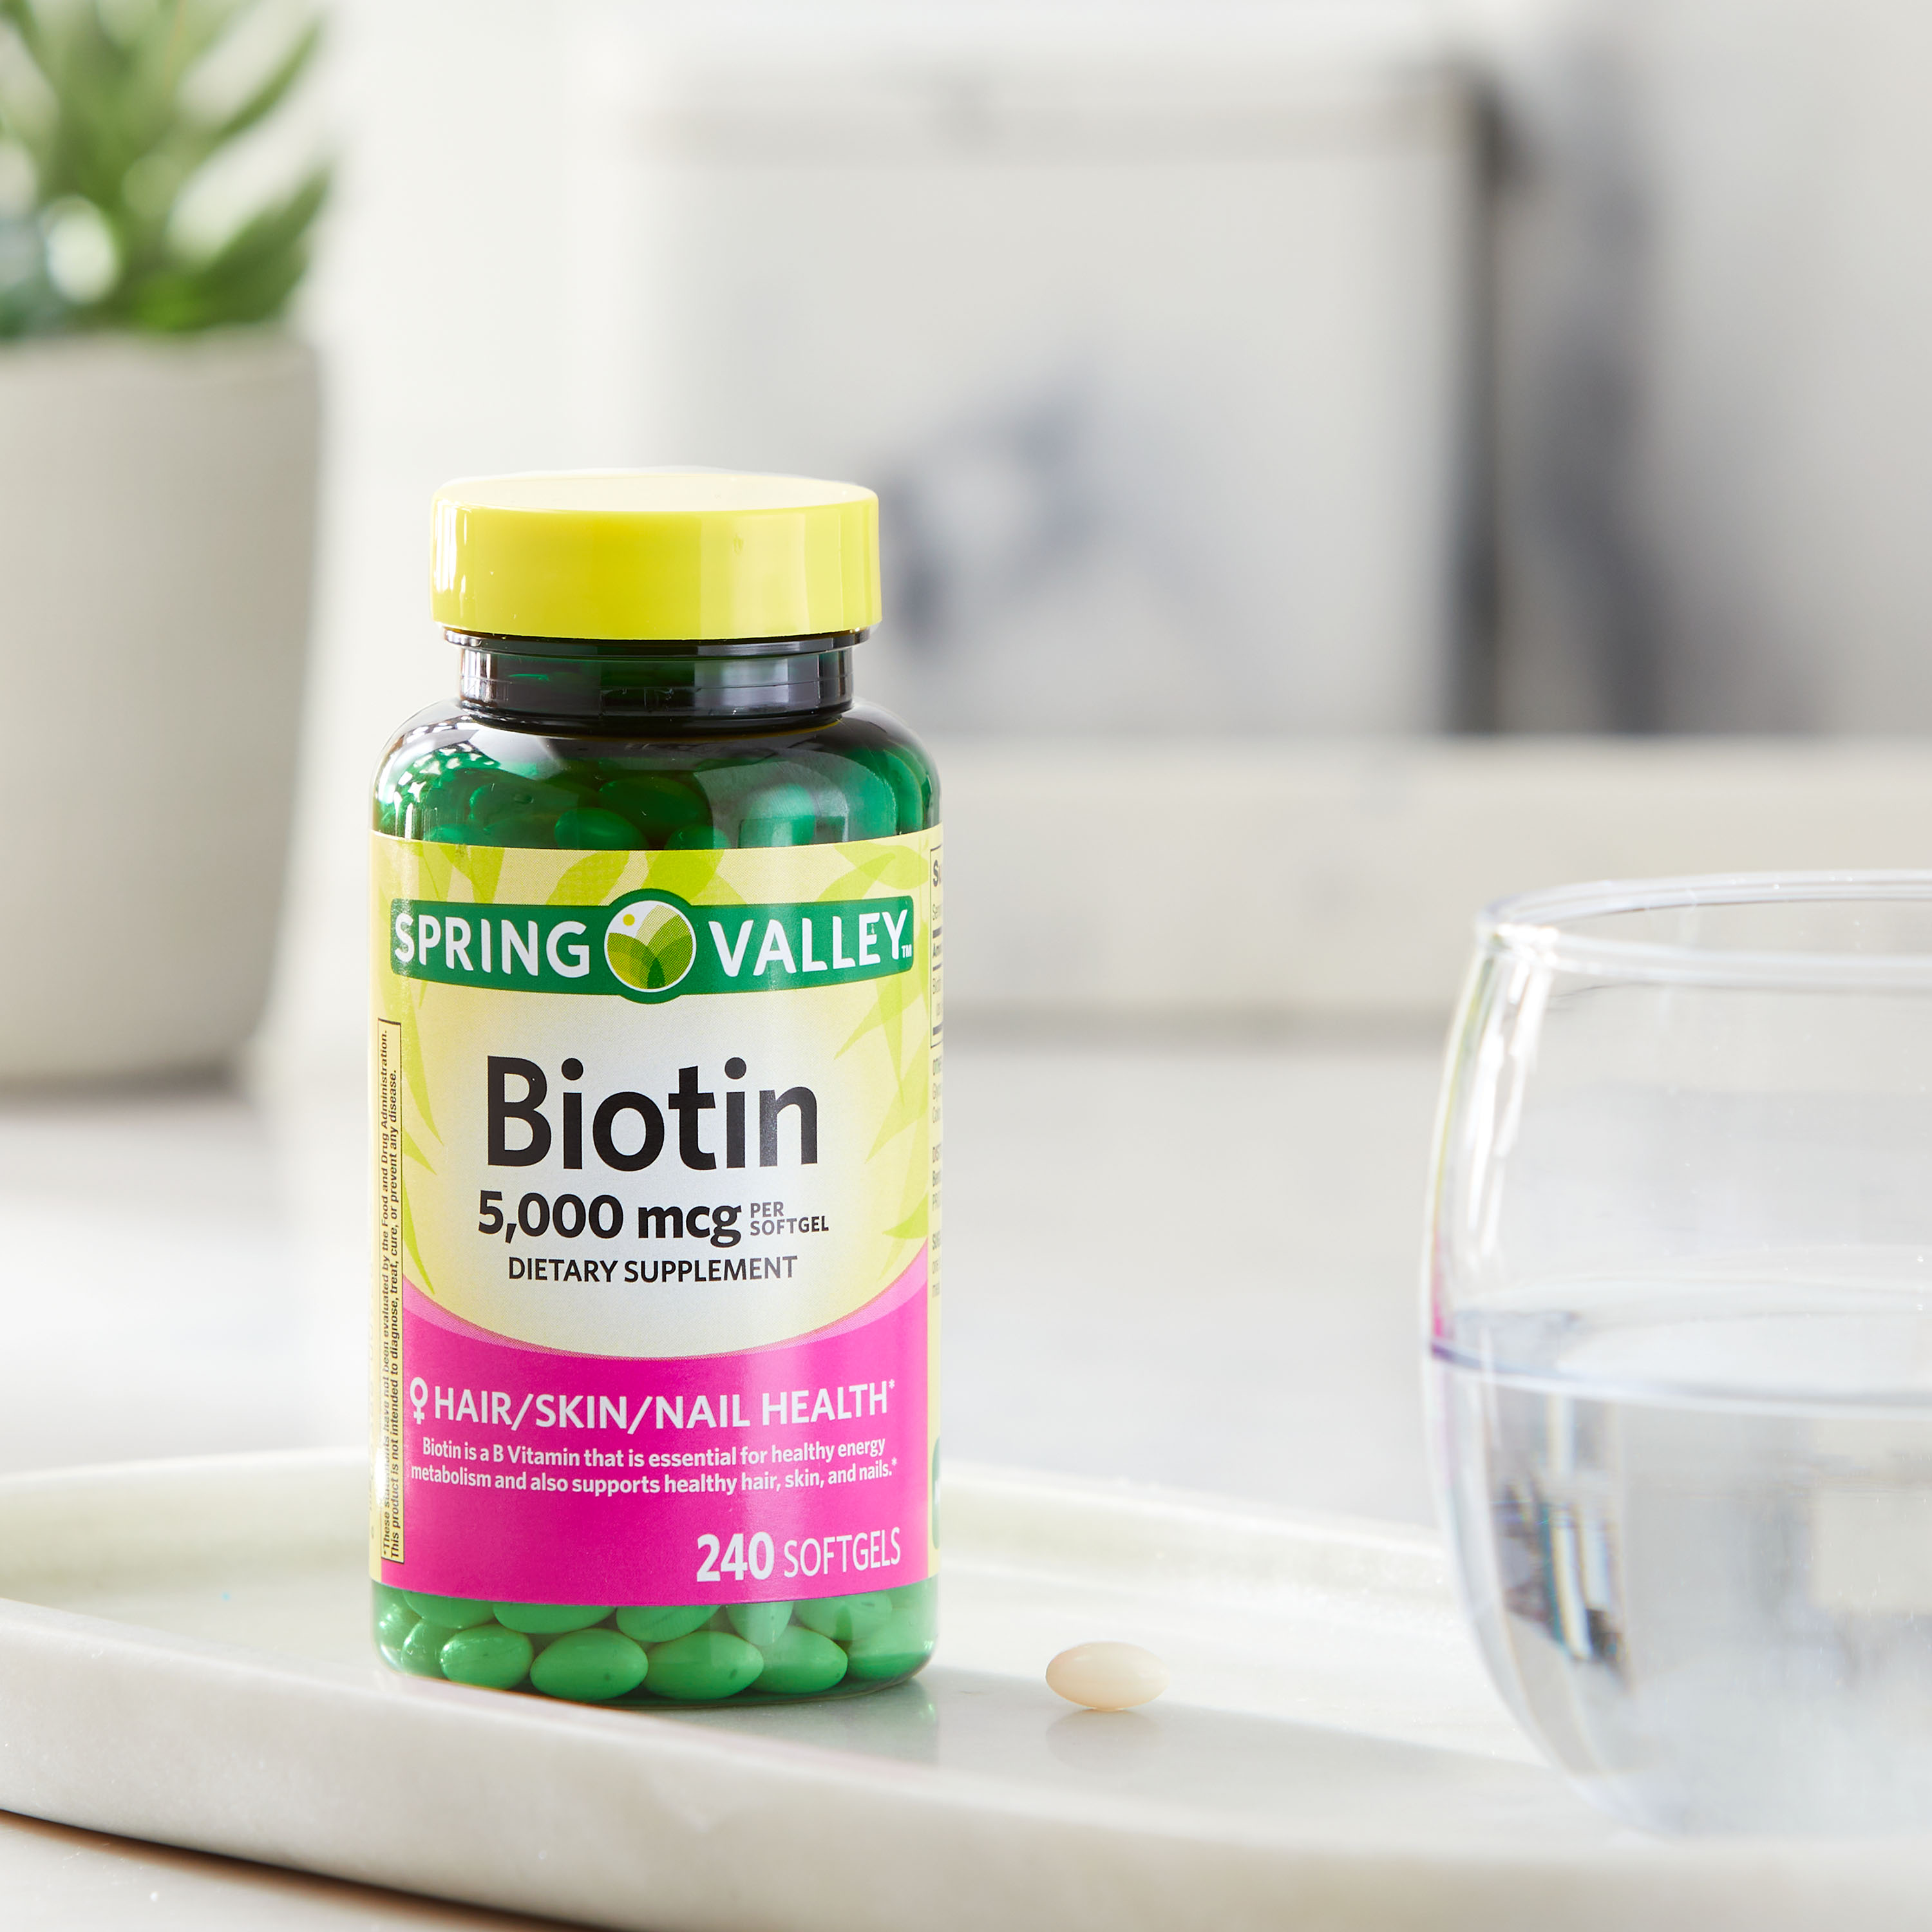 Spring Valley Biotin Softgels Dietary Supplement, 5,000 mcg, 240 Count - image 10 of 16